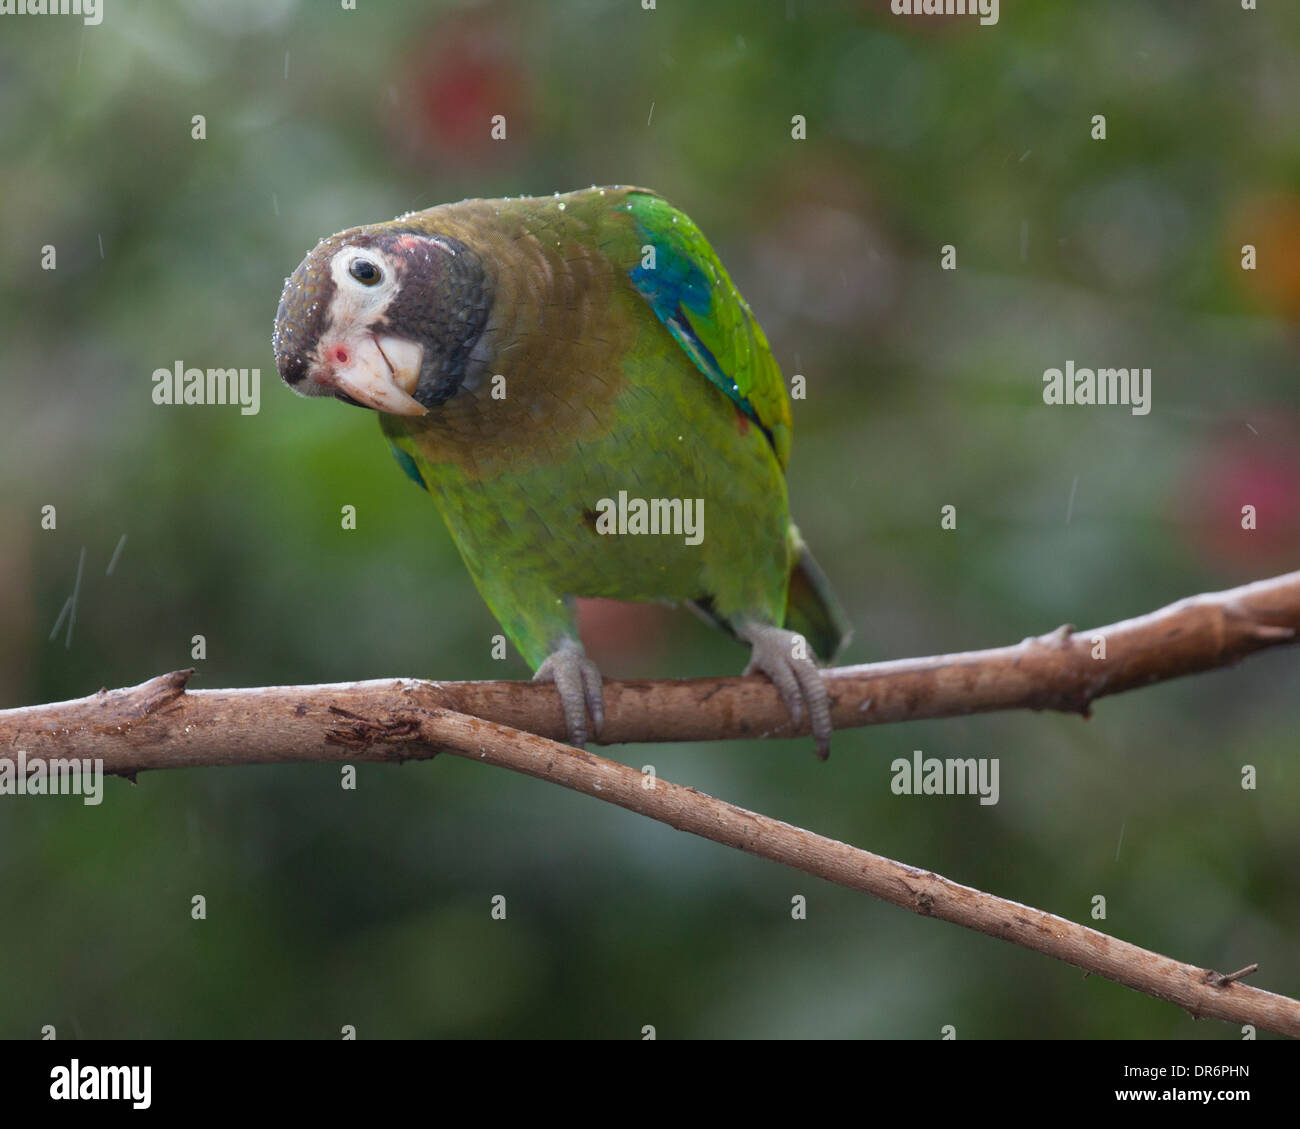 Brown-hooded Parrot (Pyrilia haematotis) perched on branch Stock Photo